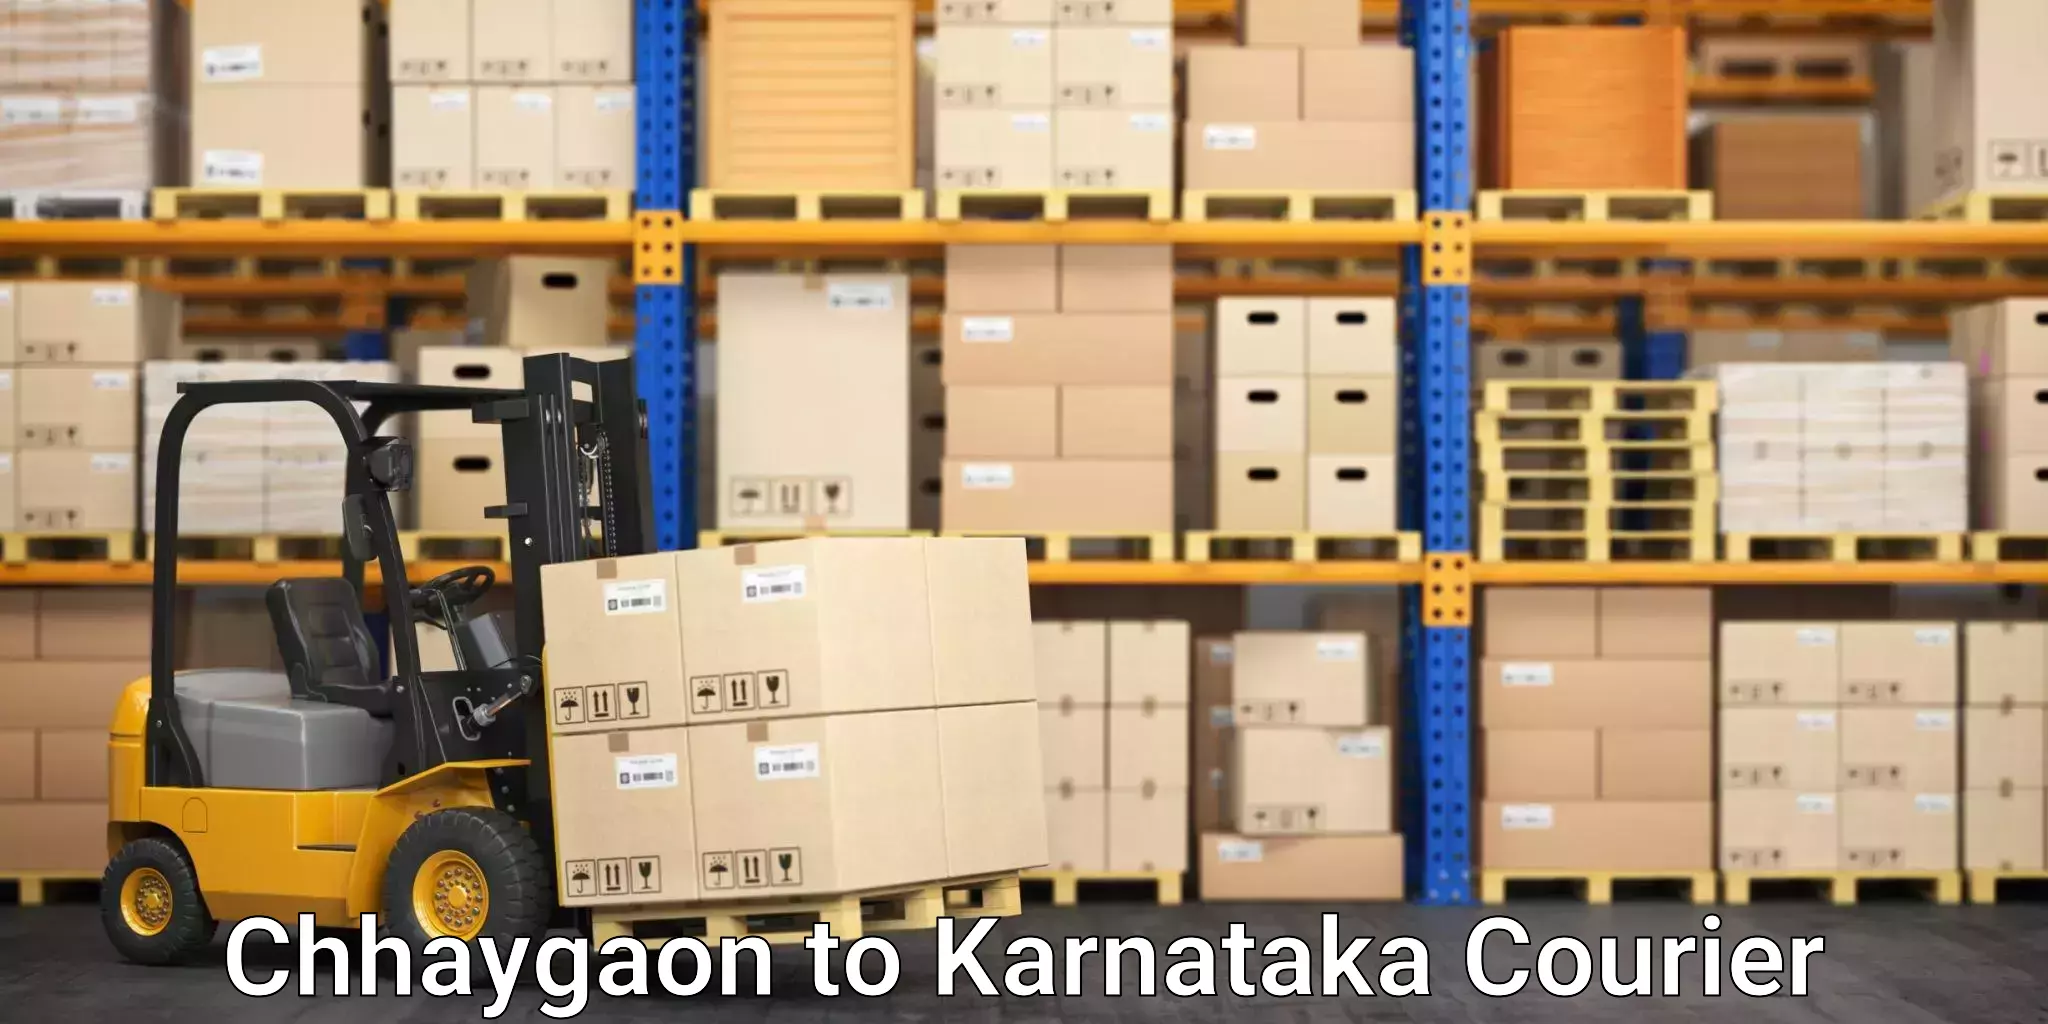 Same-day delivery solutions Chhaygaon to Kolar